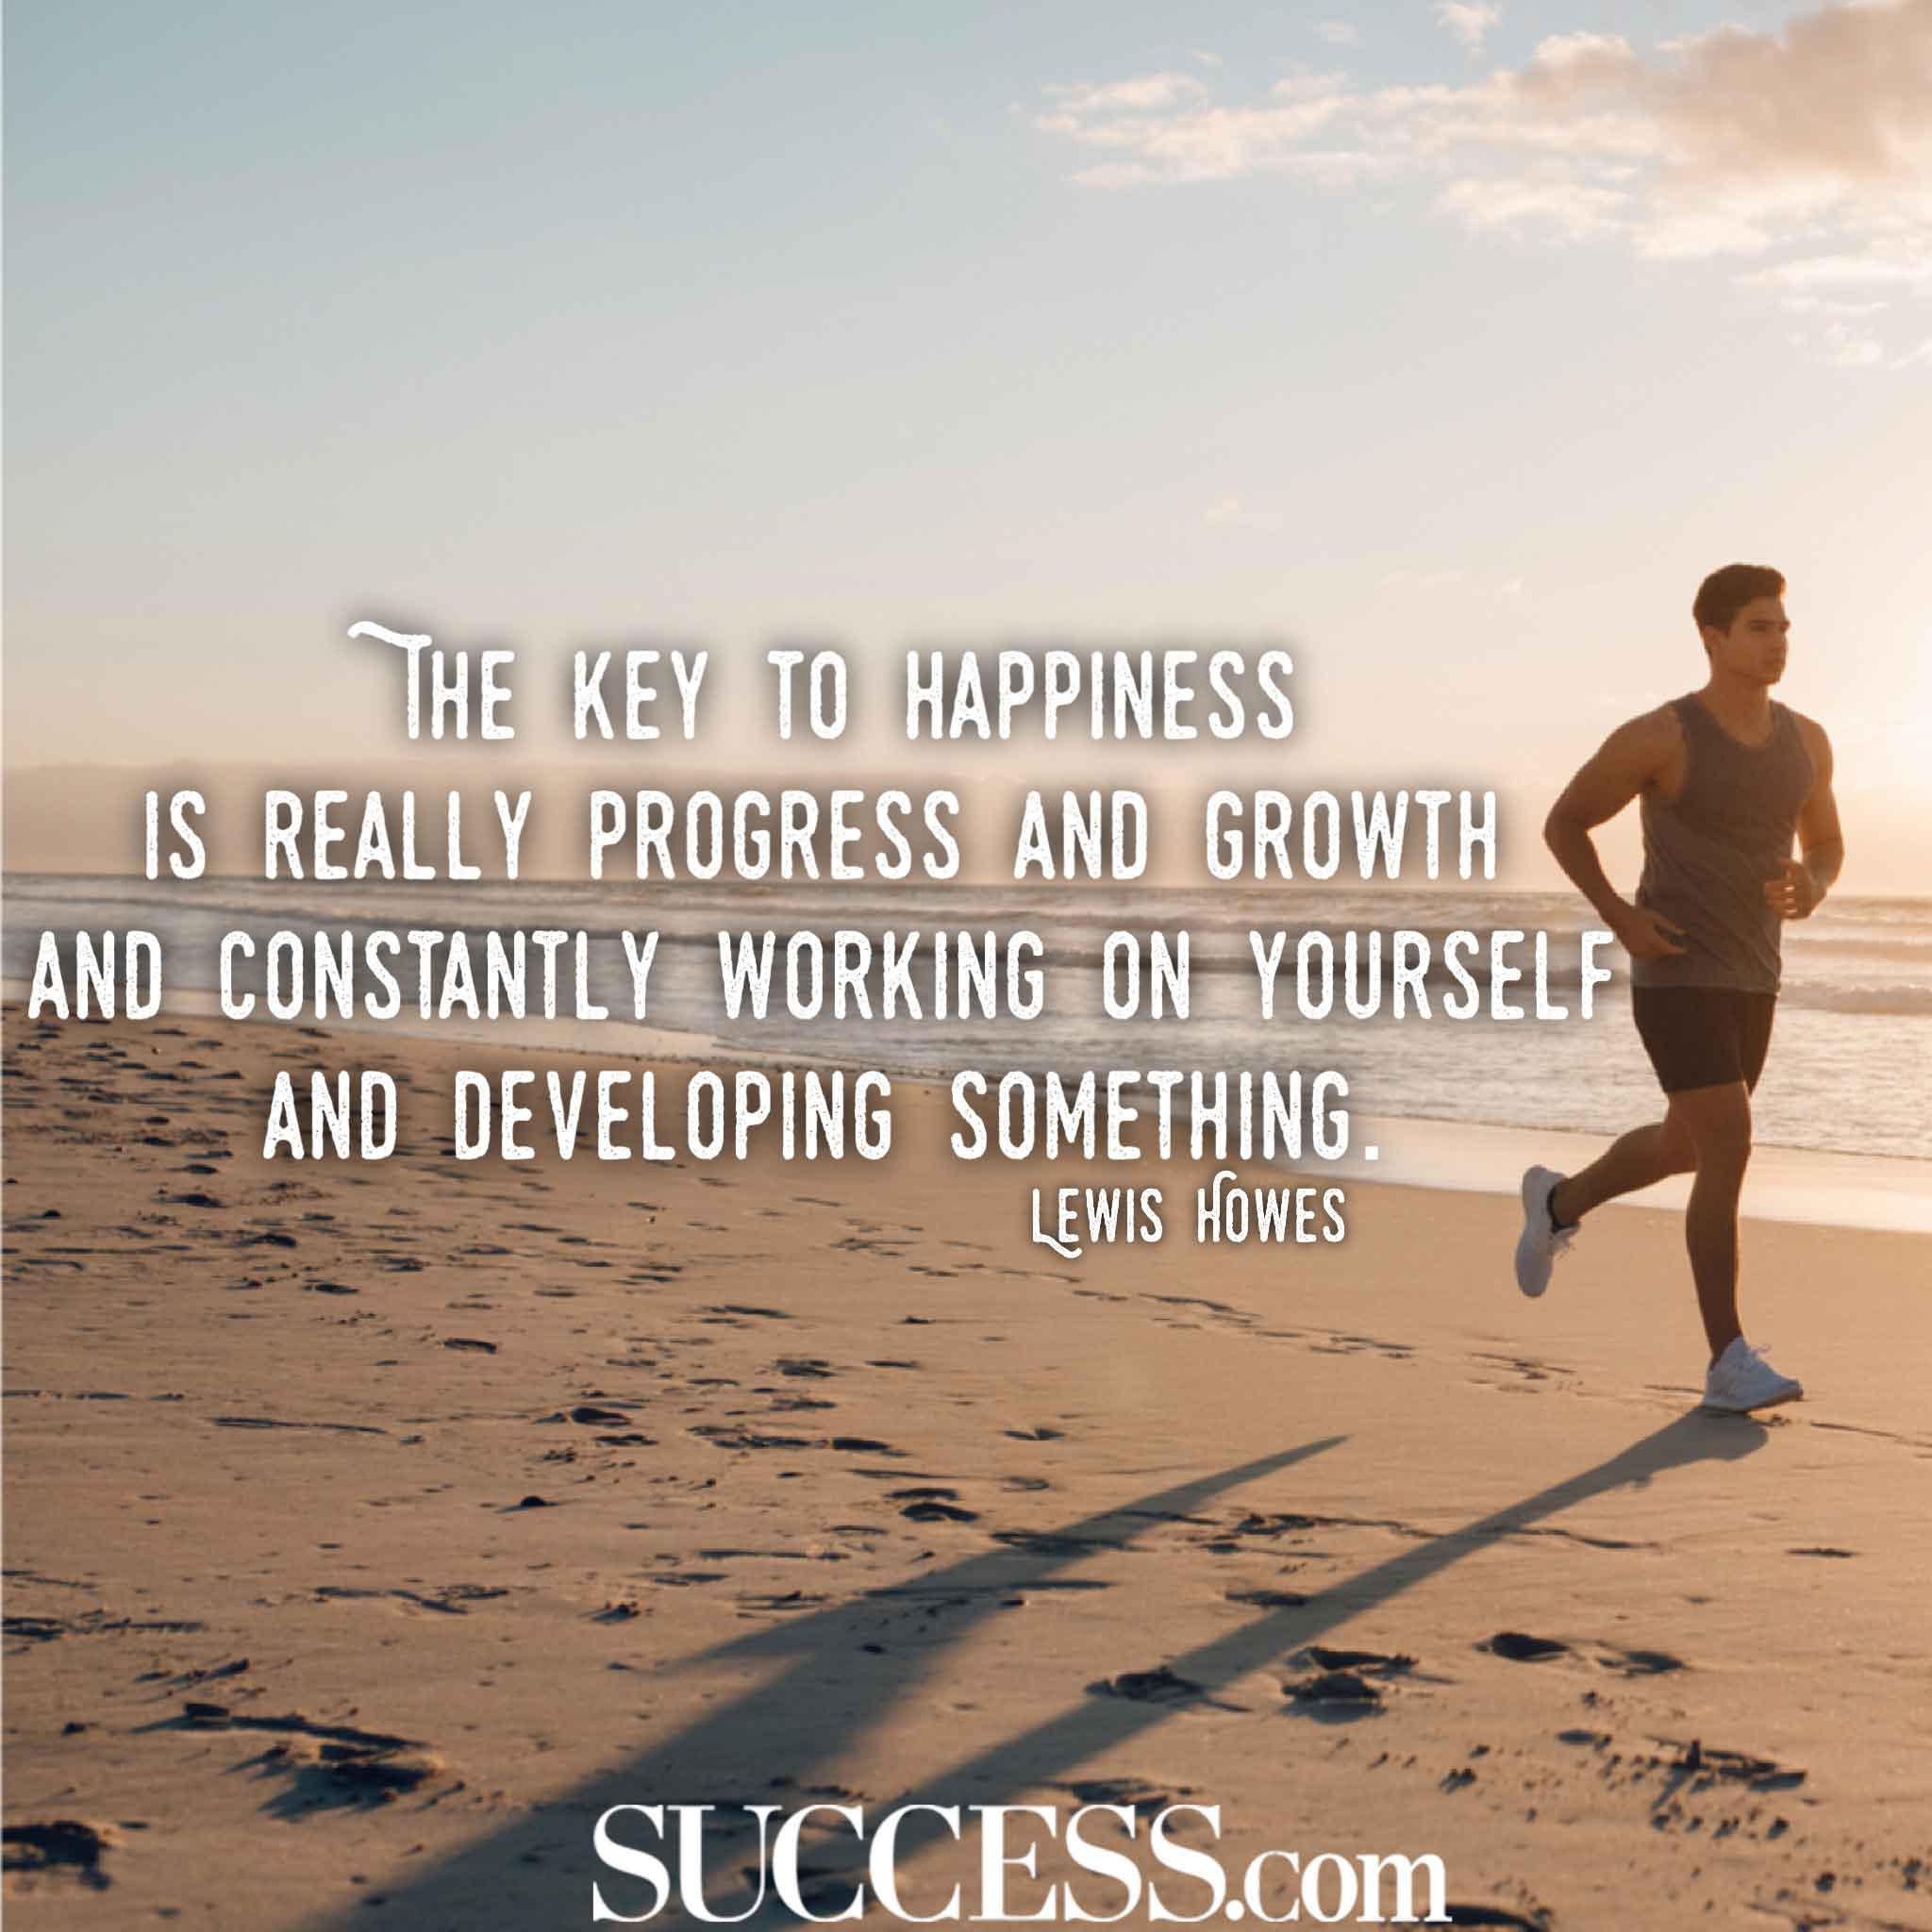 12 Motivational Quotes About Improving Yourself | SUCCESS